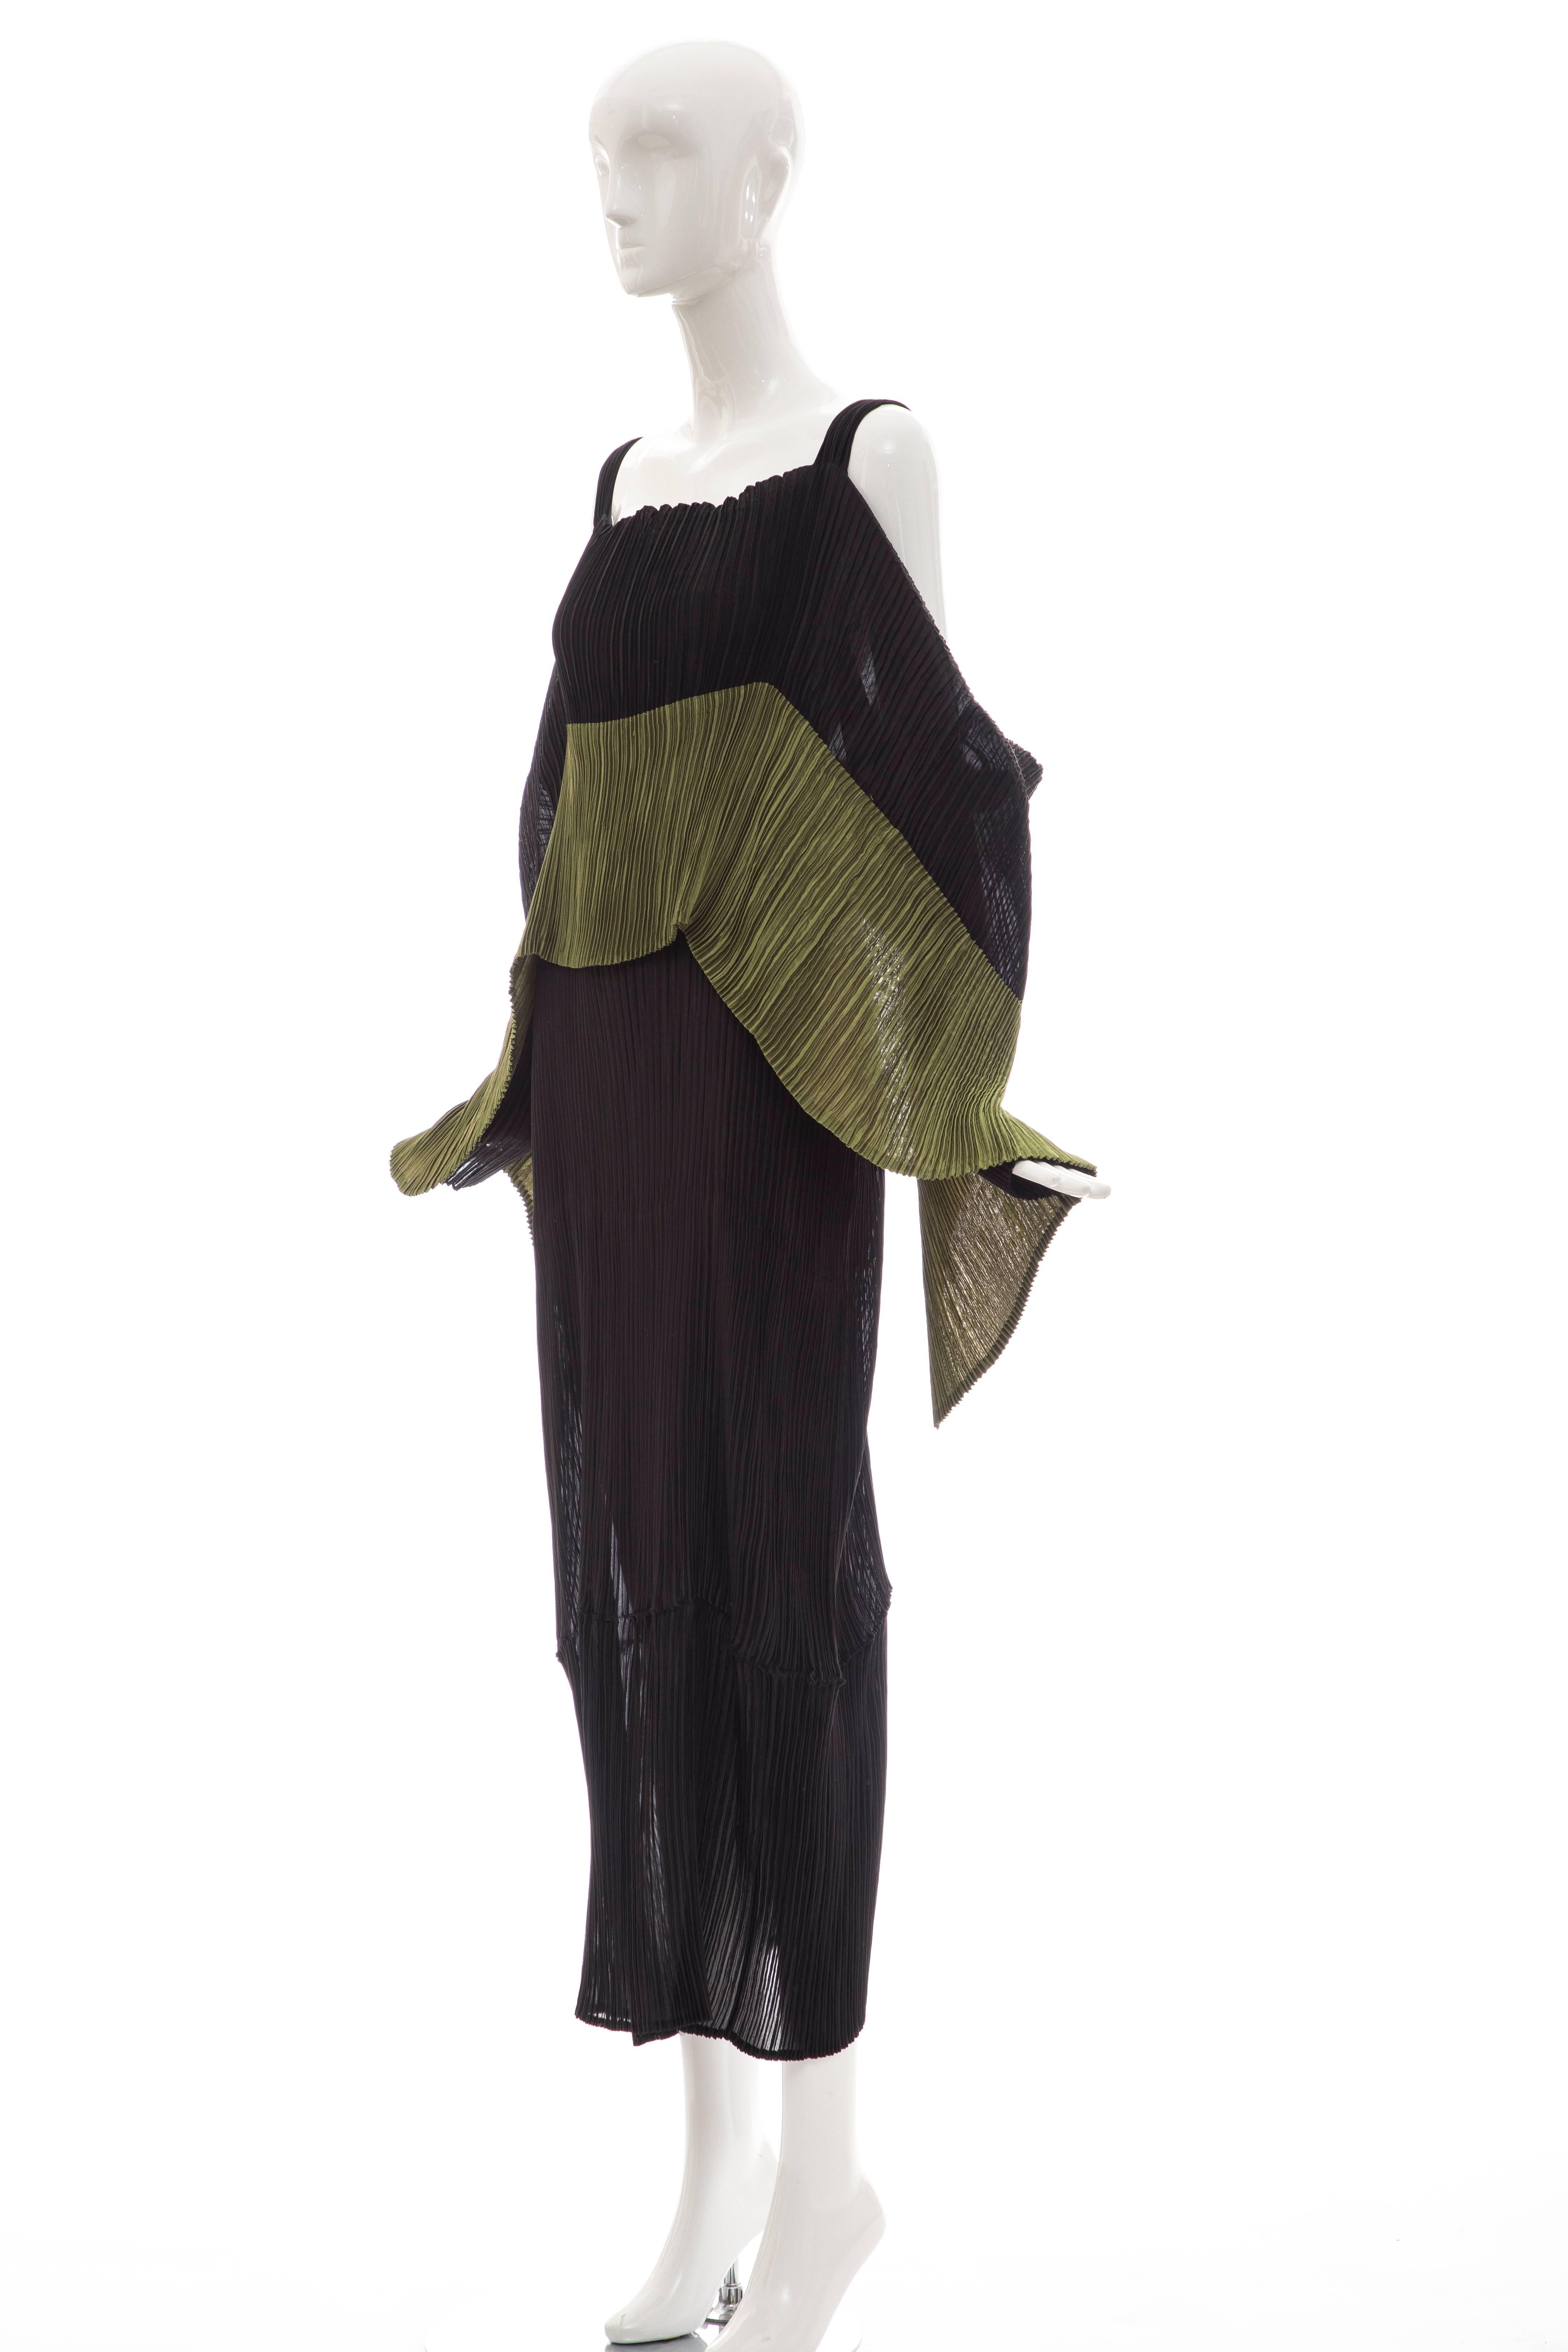 Issey Miyake Black Pleated Dress With Olive Green Panel At Bodice, Circa 1990s 5